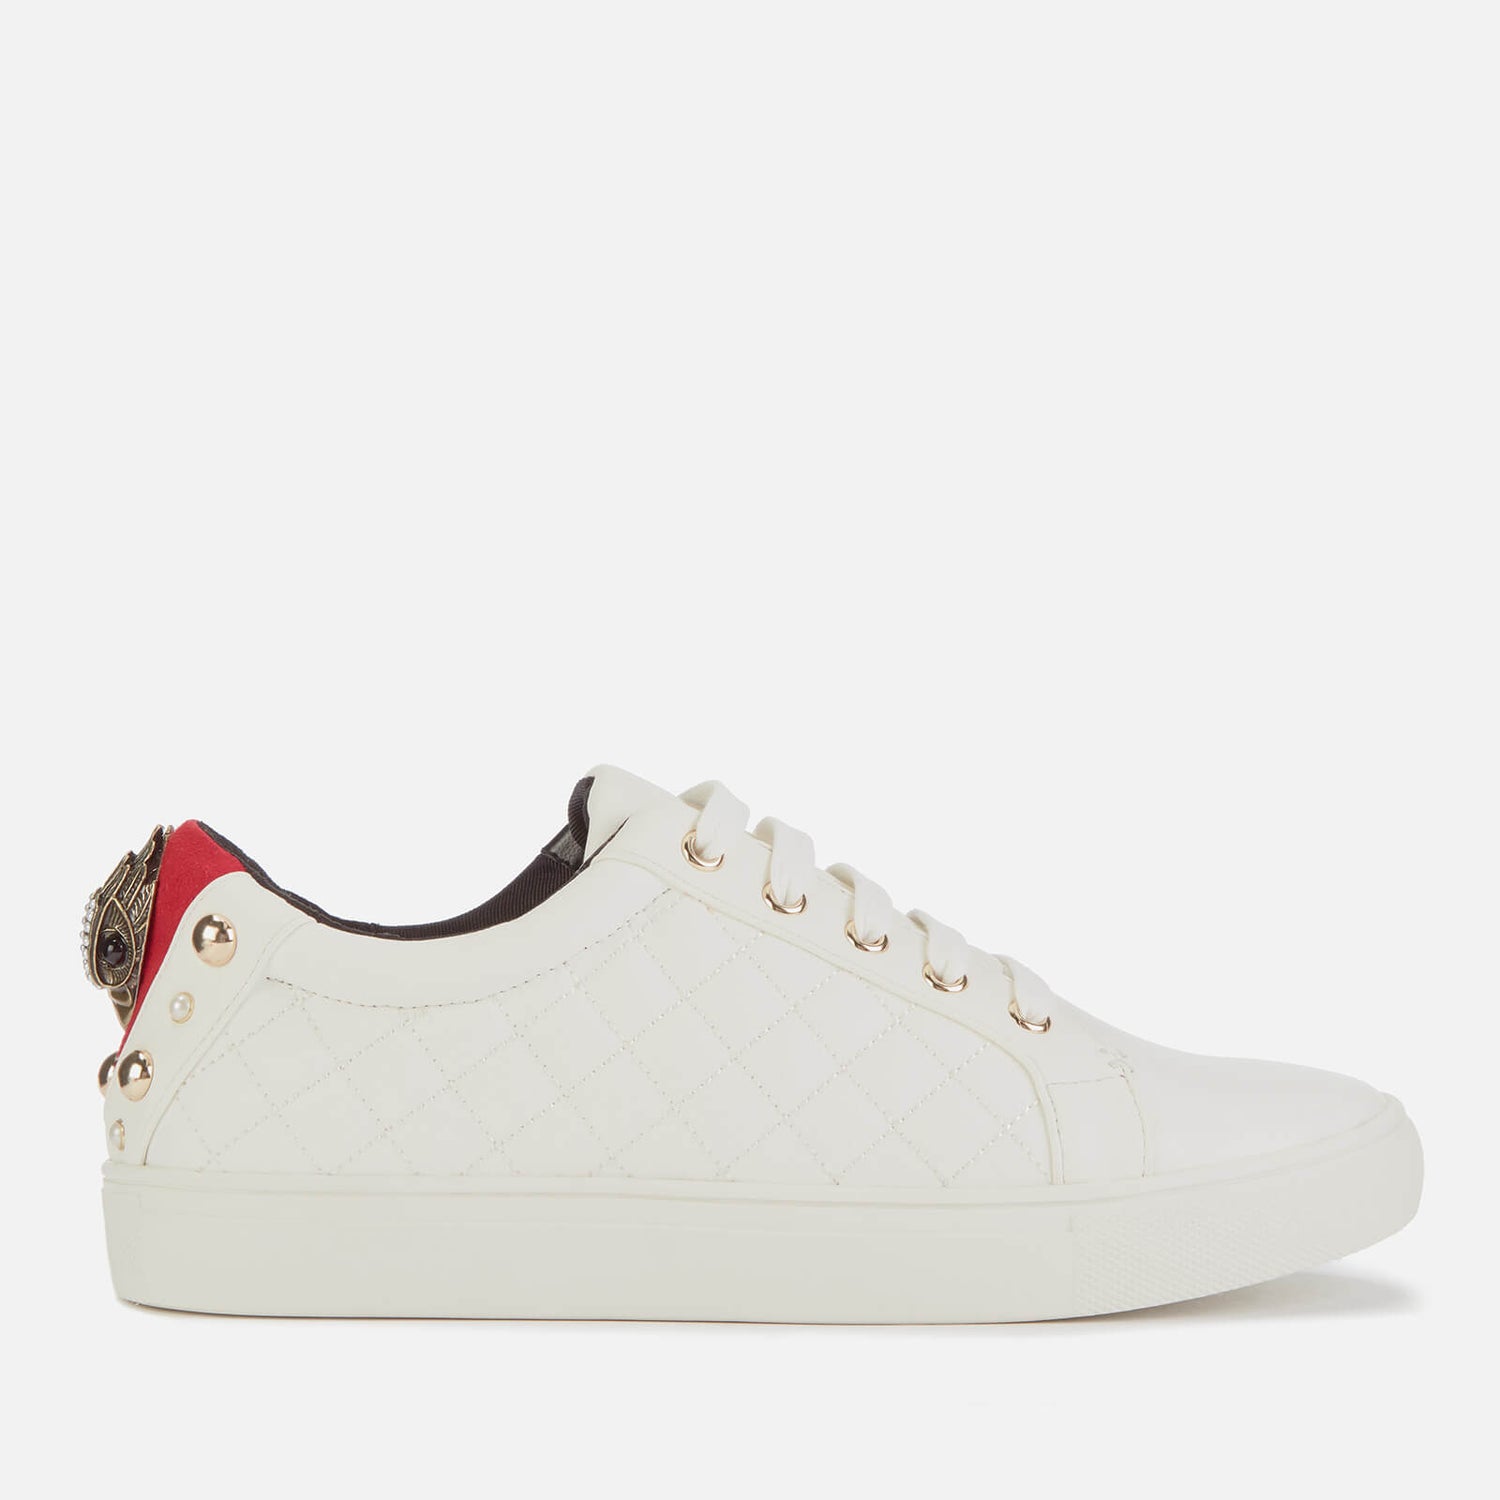 Kurt Geiger London Women's Ludo Leather Quilted Low Top Trainers - White